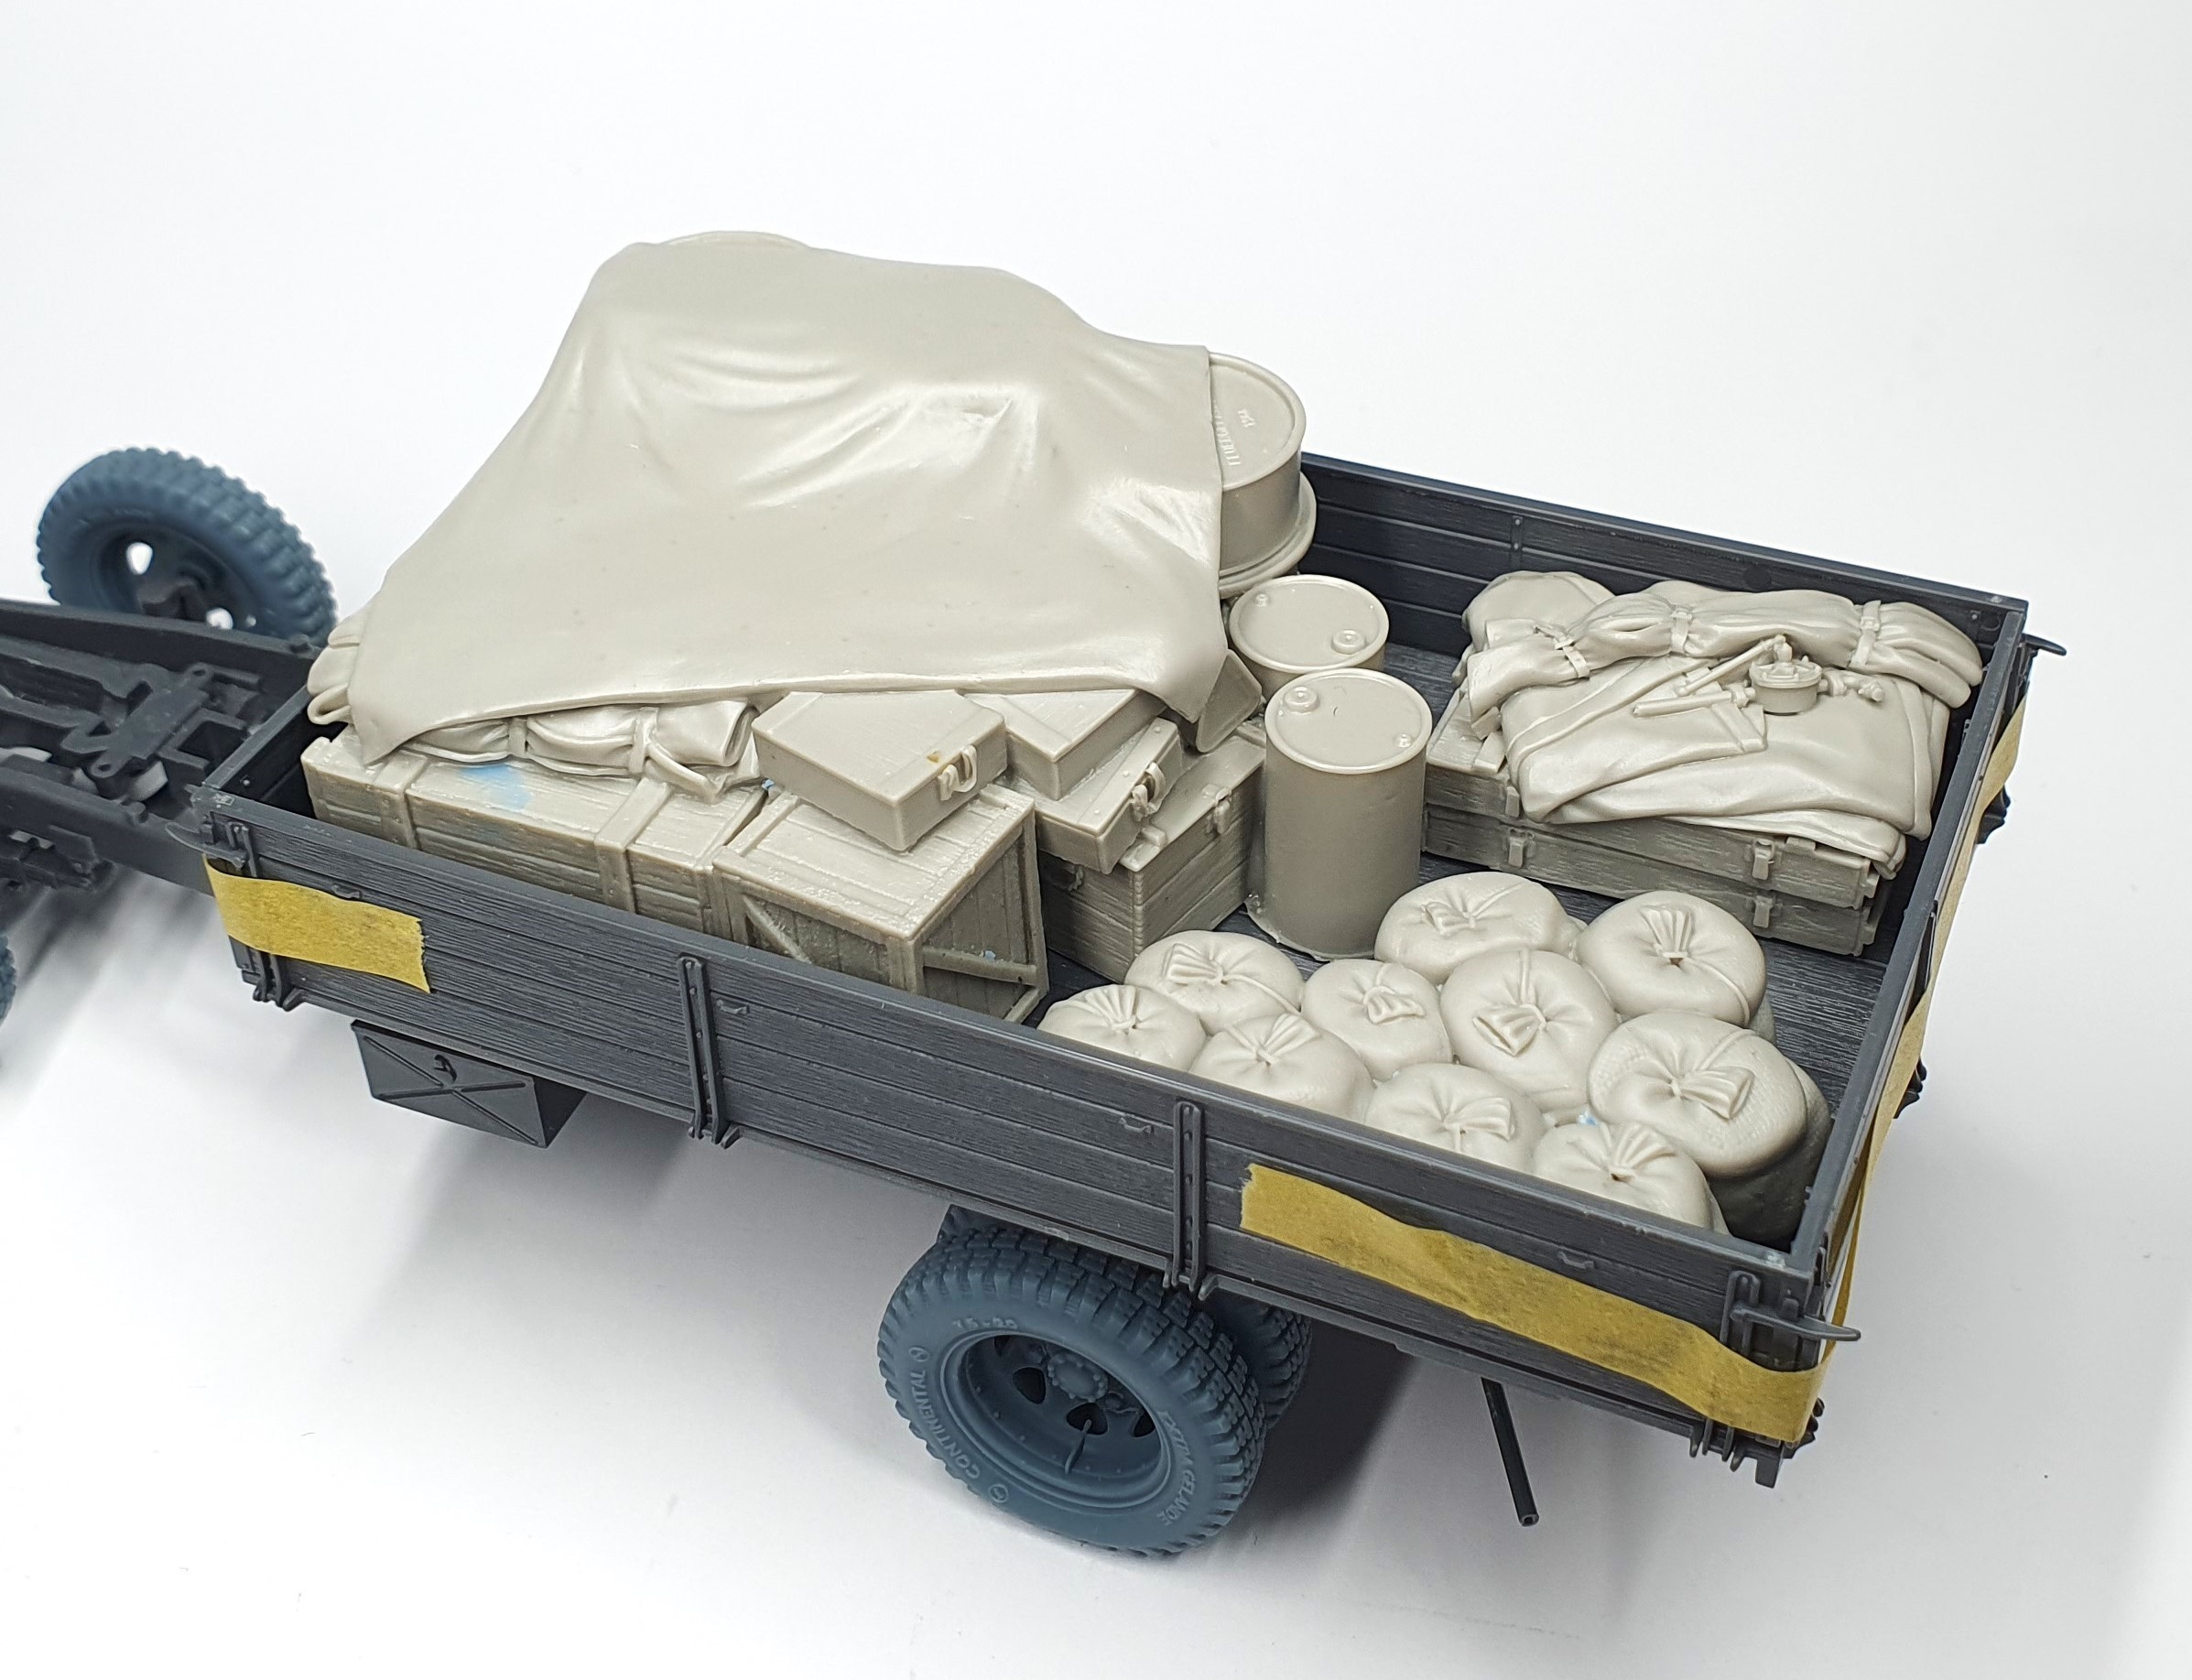 Opel Blitz load for cargo bed